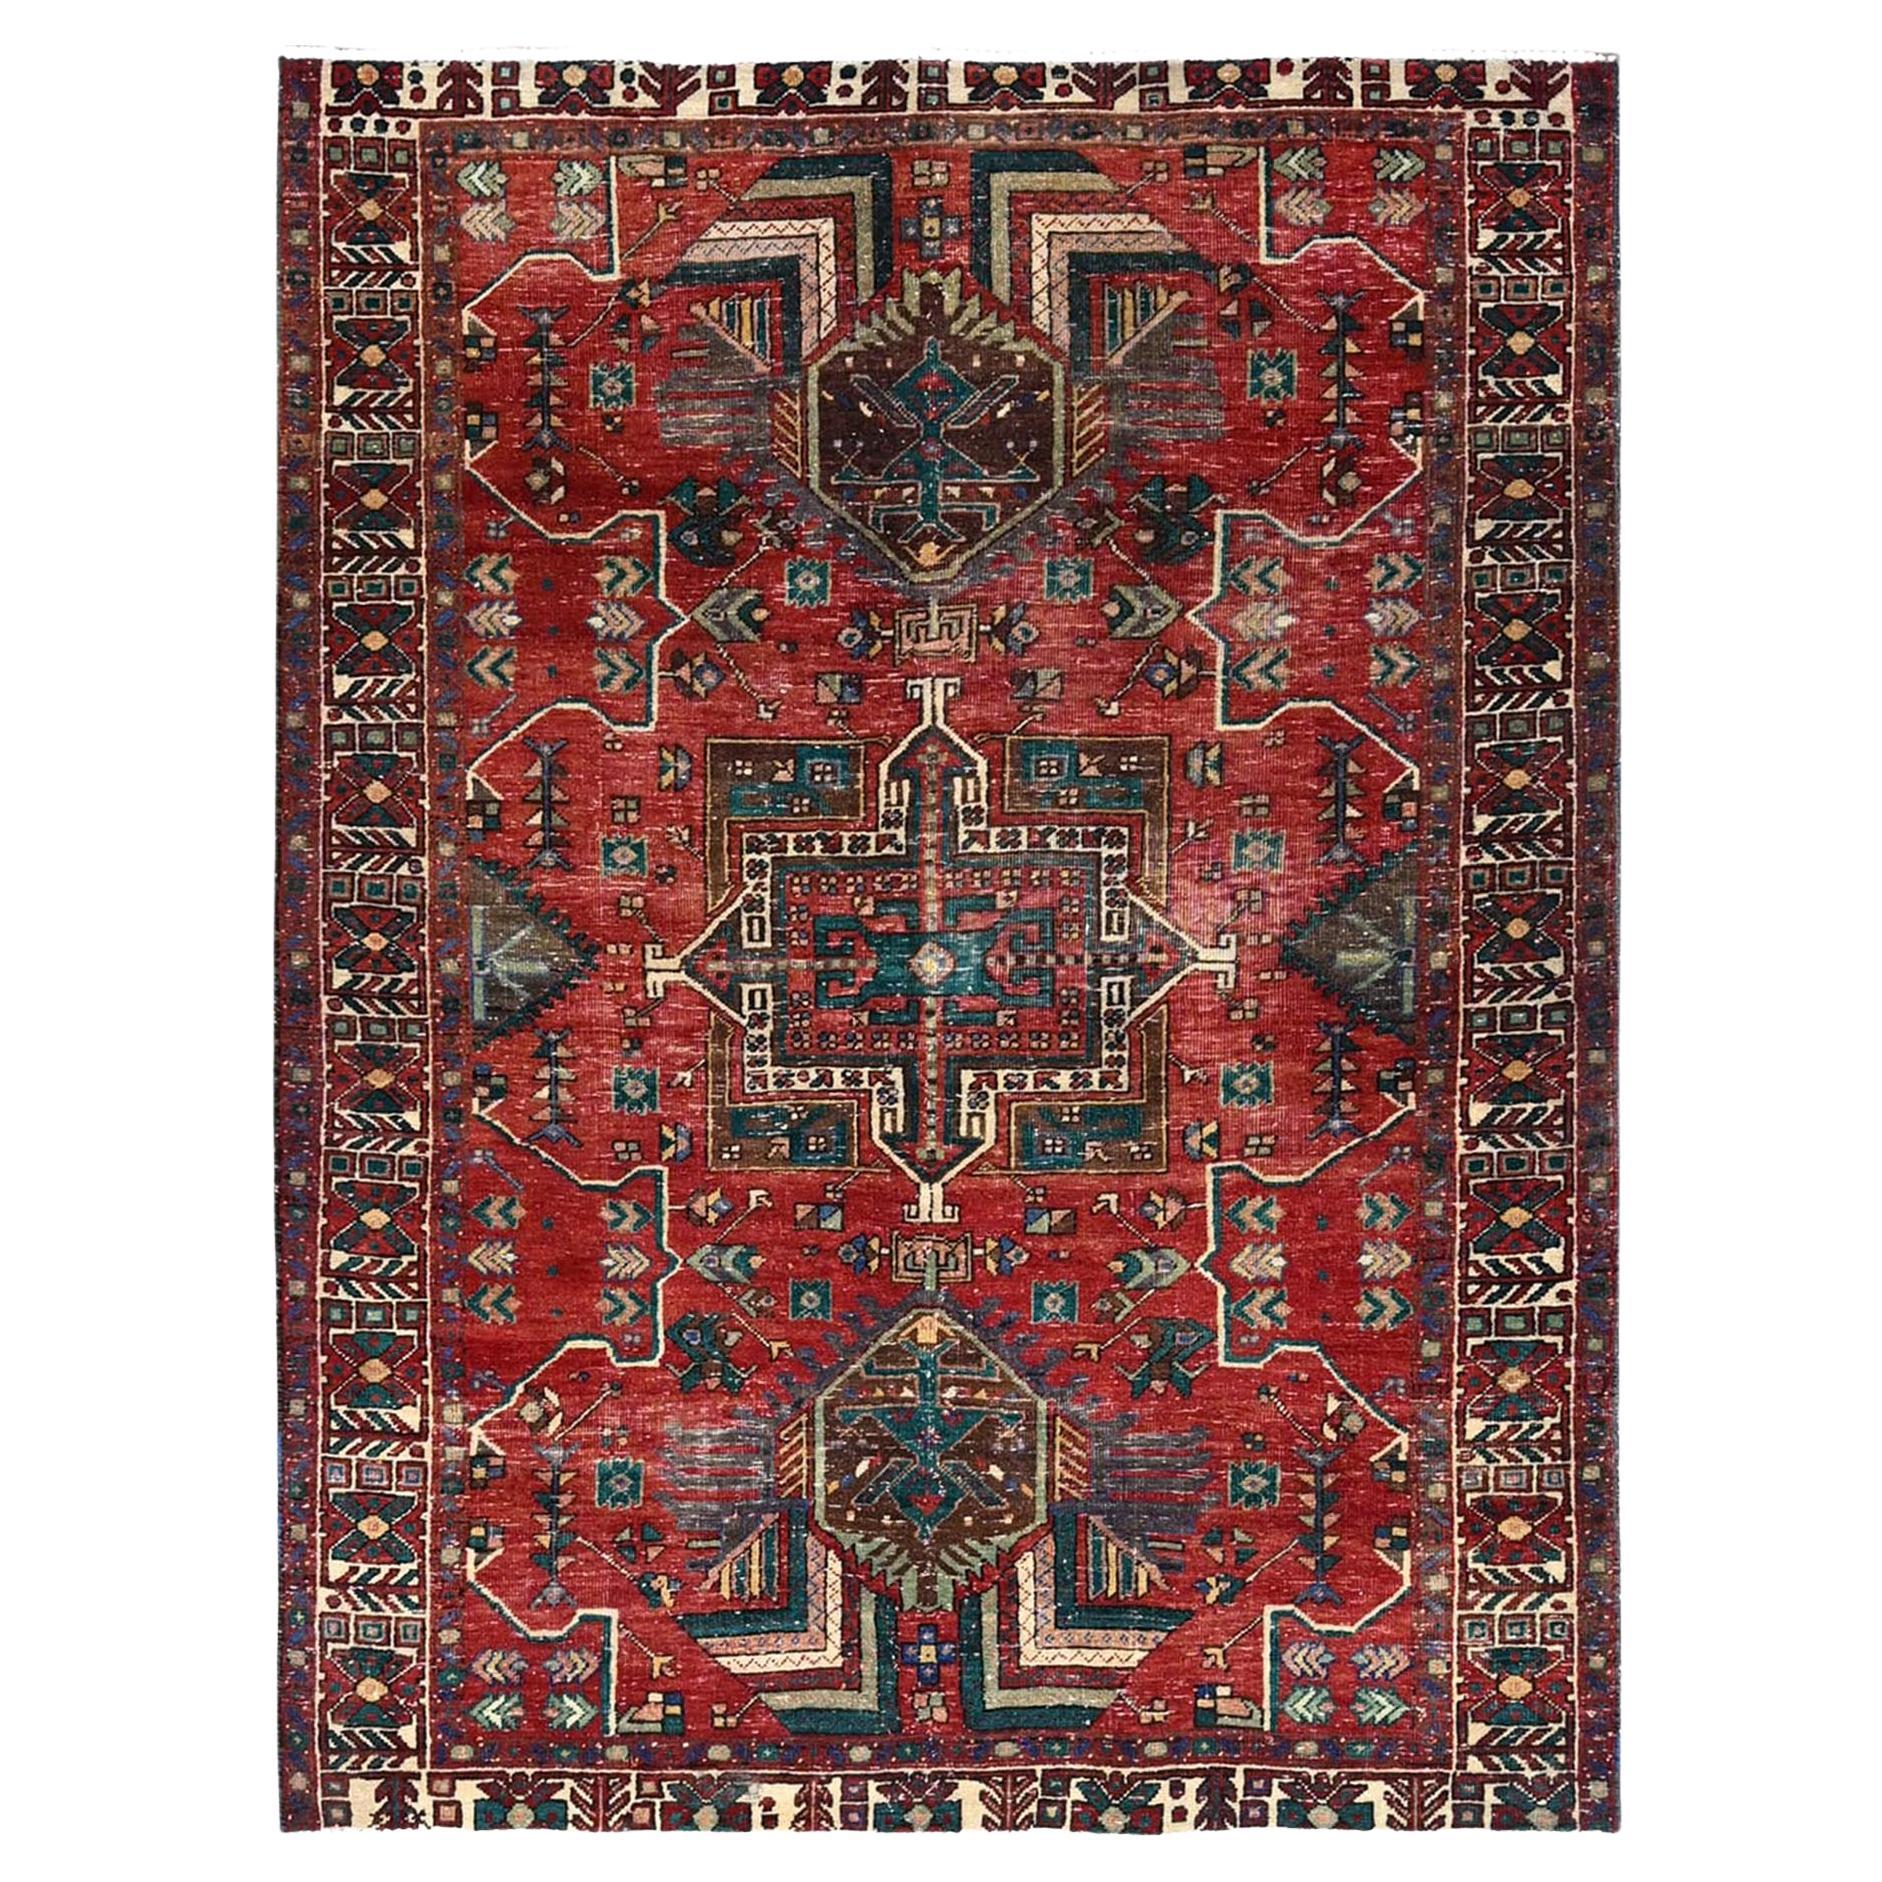 Valiant Poppy Red Ivory Persian Karajeh Distressed Clean Hand Knotted Wool Rug